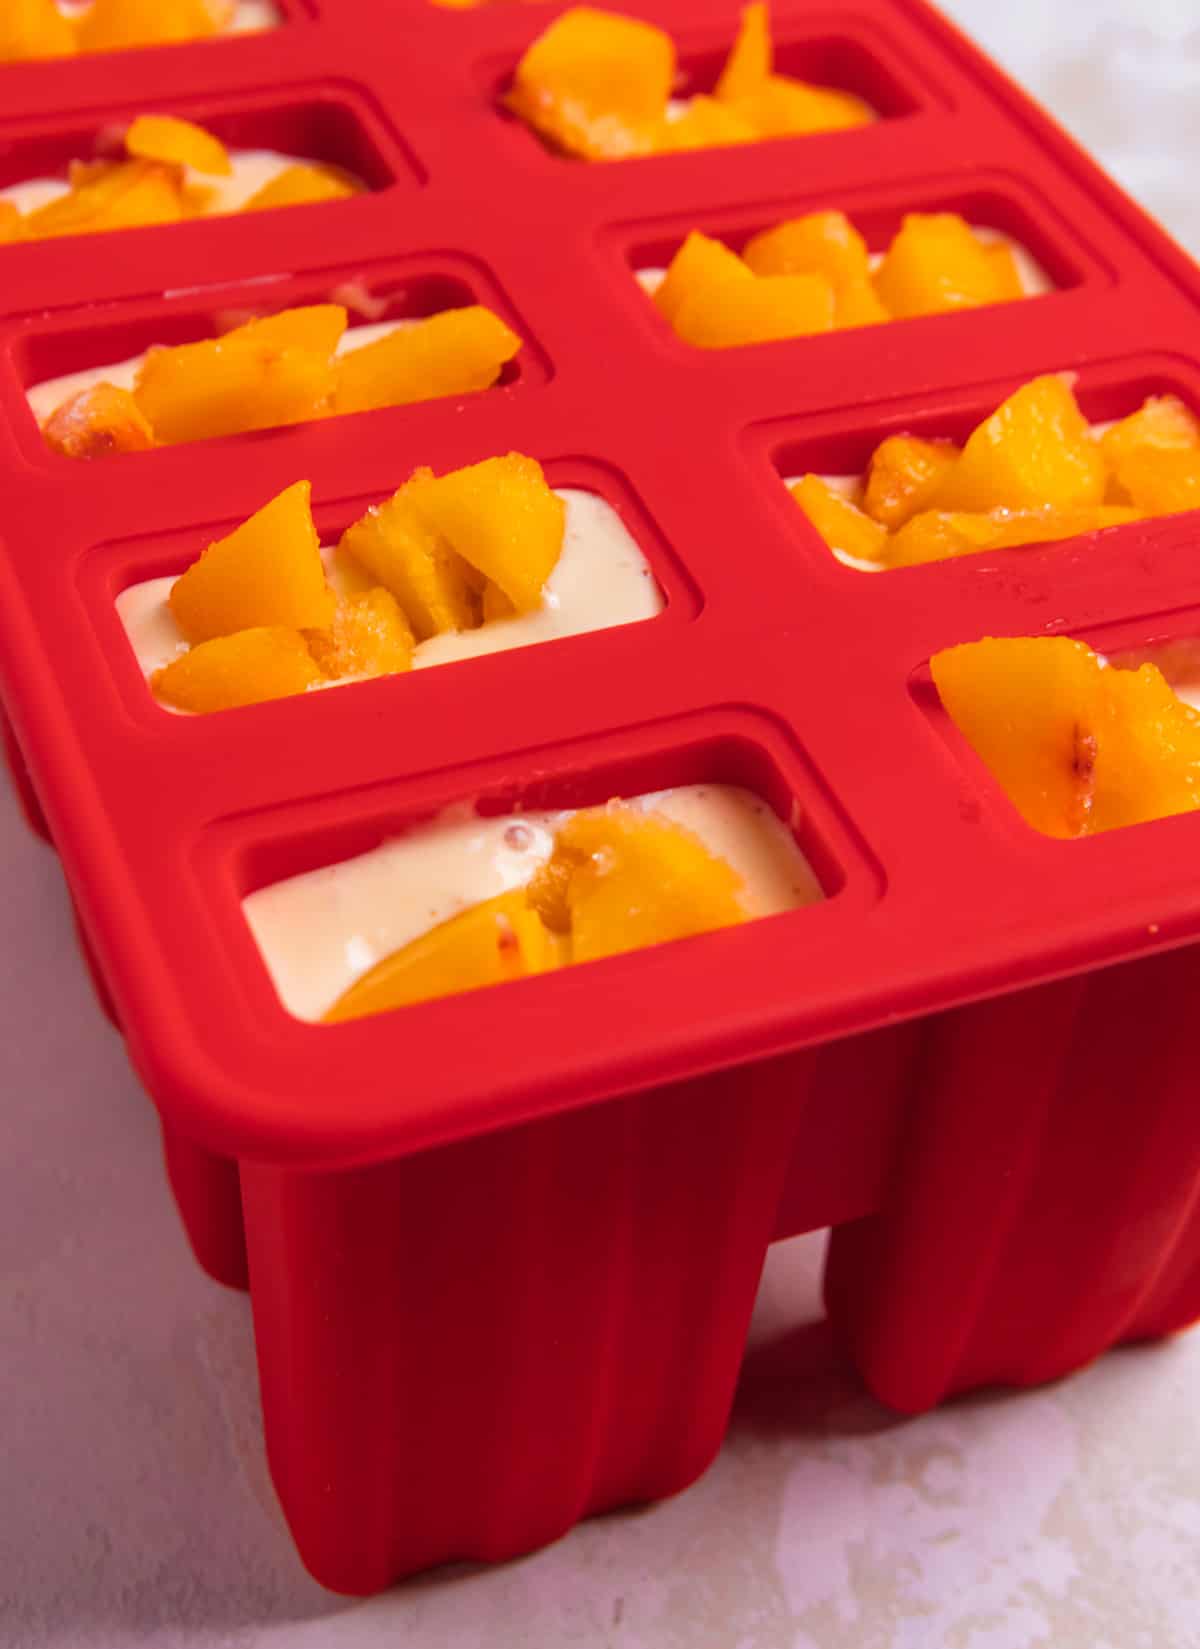 Popsicle molds filled with mixture and topped with peaches.